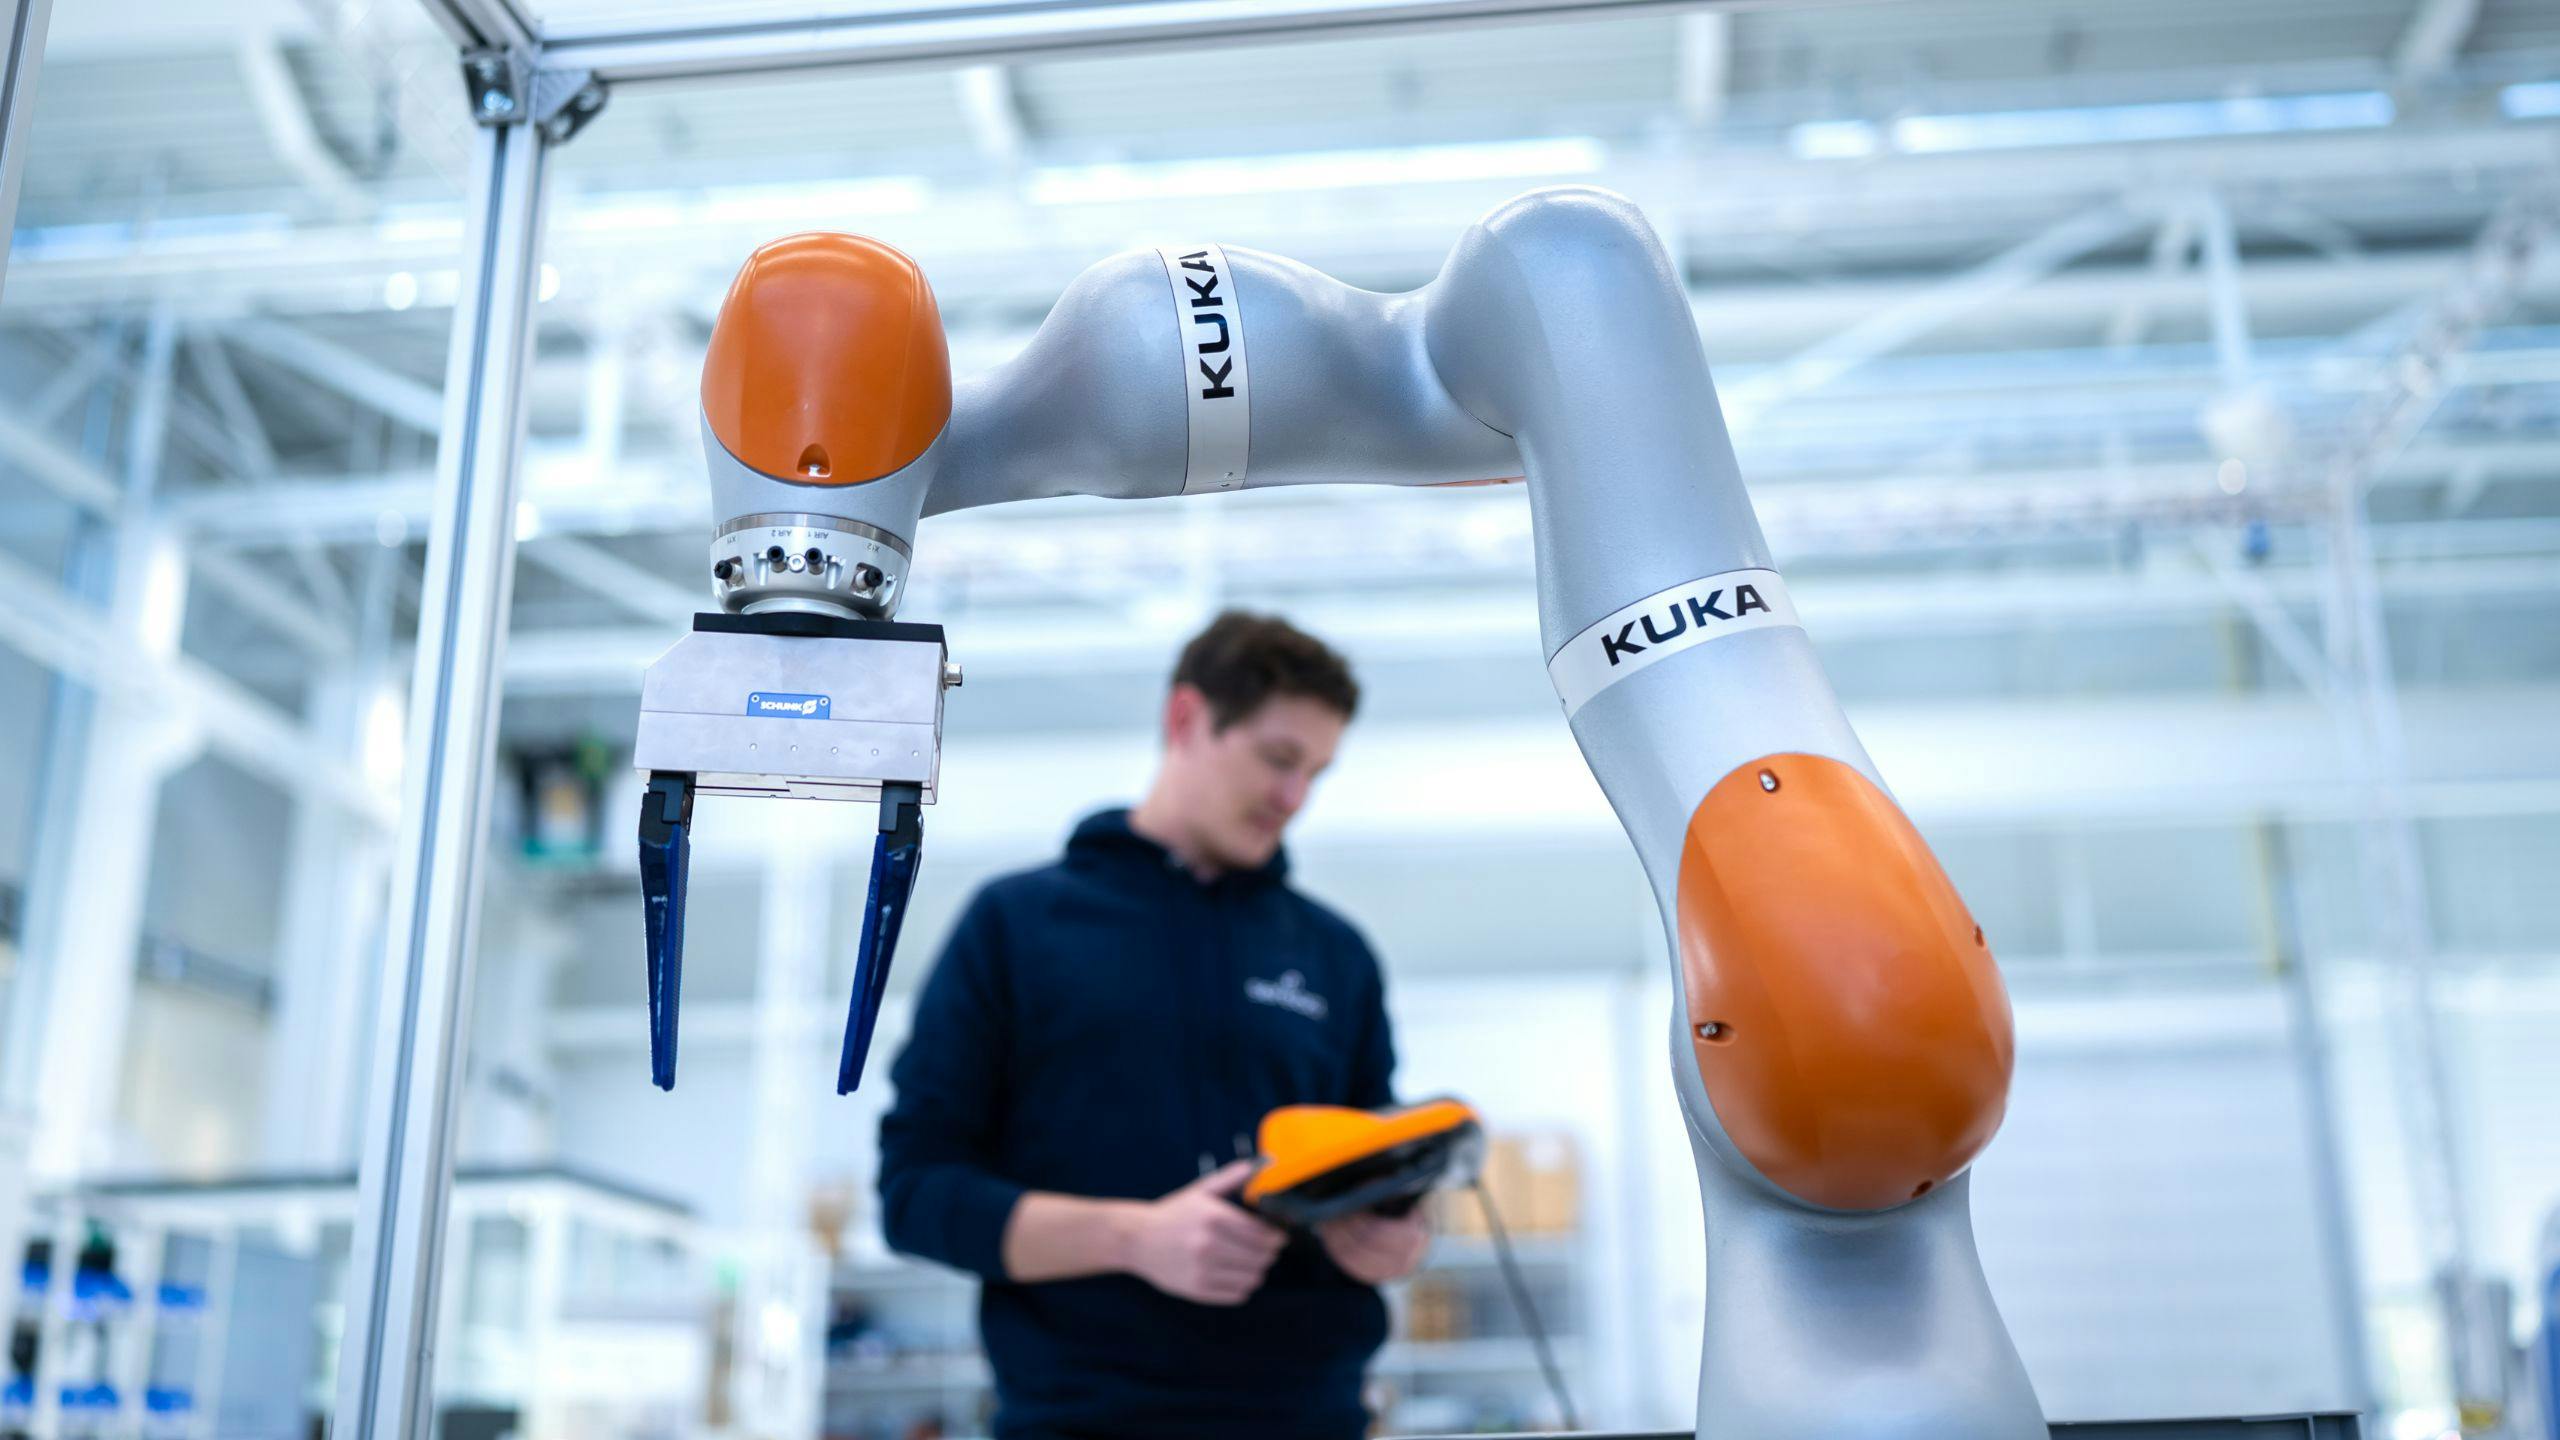 Industrial robot vs. Cobot: Which is the right robot for your warehouse?